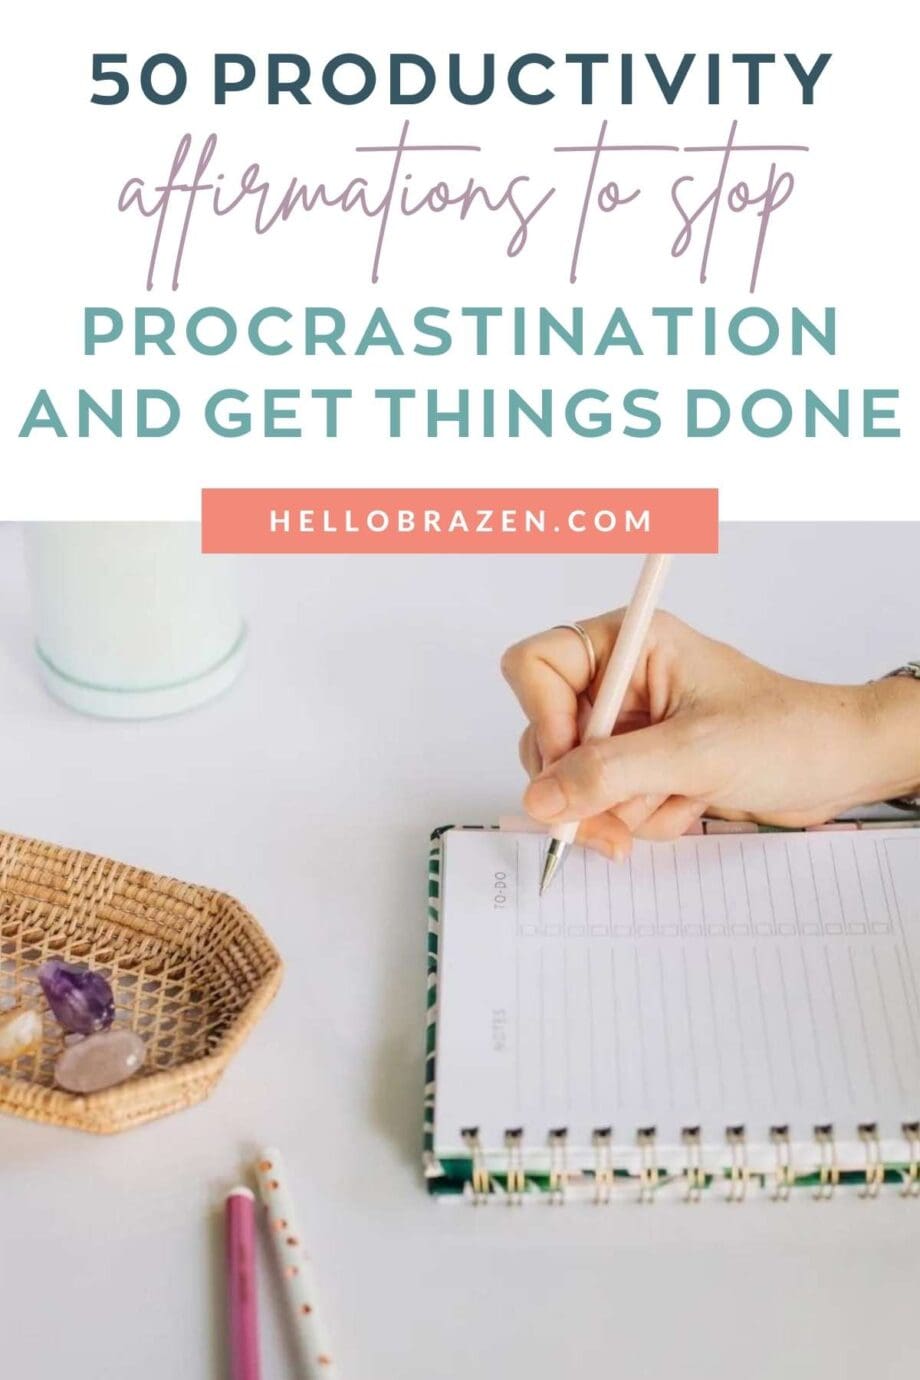 Use these productivity affirmations to stop procrastination and get things done! Repeat them each morning, get into a positive mindset and go!